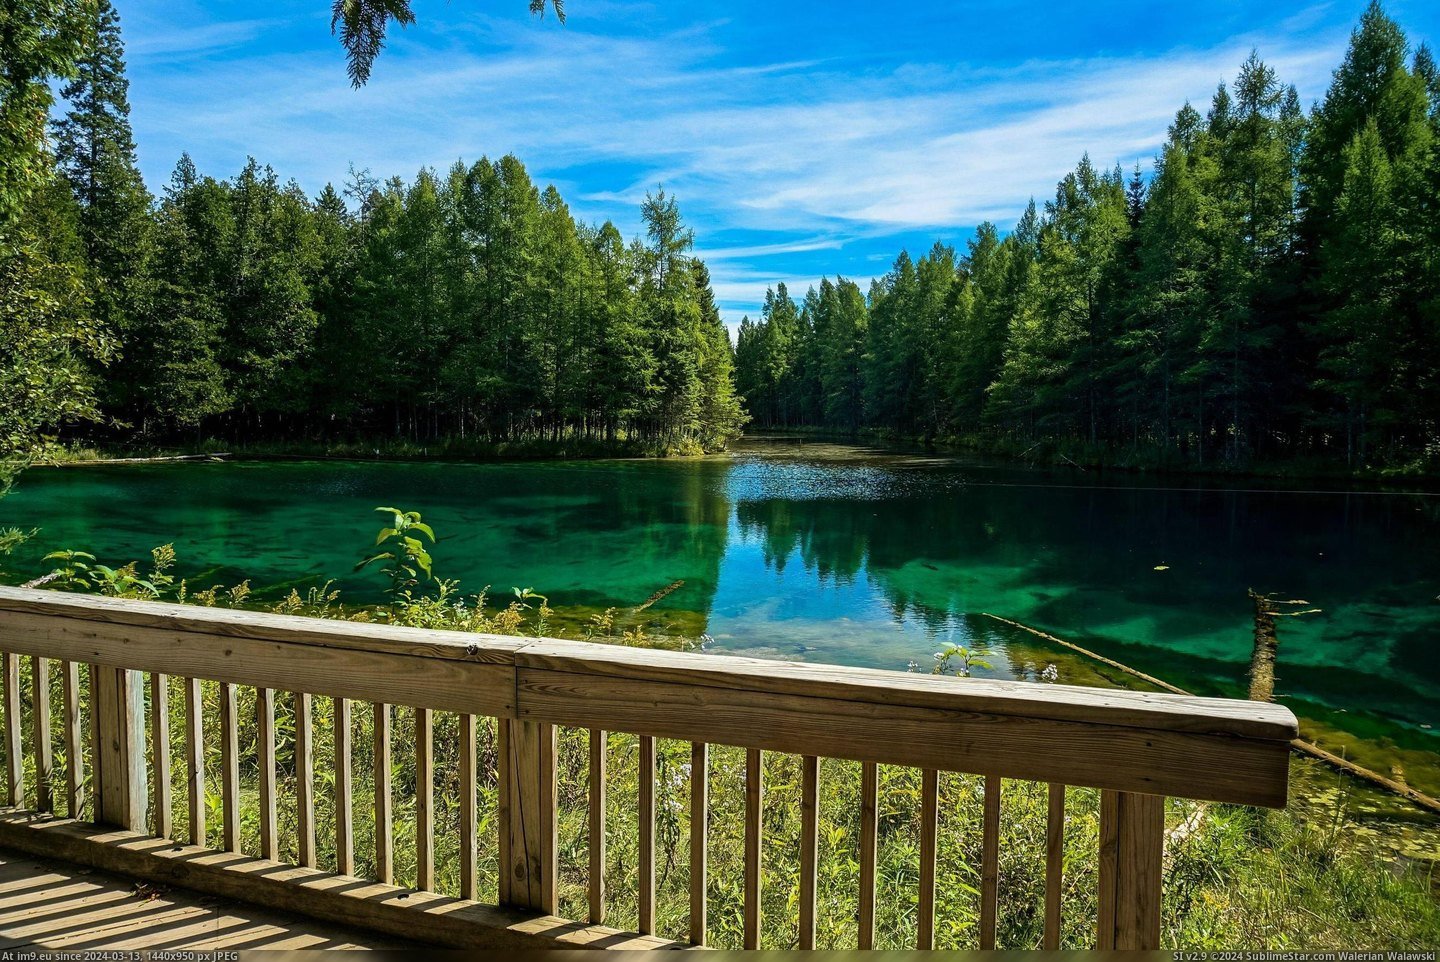 #Mirror #Natural #Early #Called #Americans #Native #Freshwater #Spring #Largest #Heaven #Michigan [Pics] Michigan's largest natural freshwater spring, early Native Americans called it the 'Mirror of Heaven.' Pic. (Bild von album My r/PICS favs))